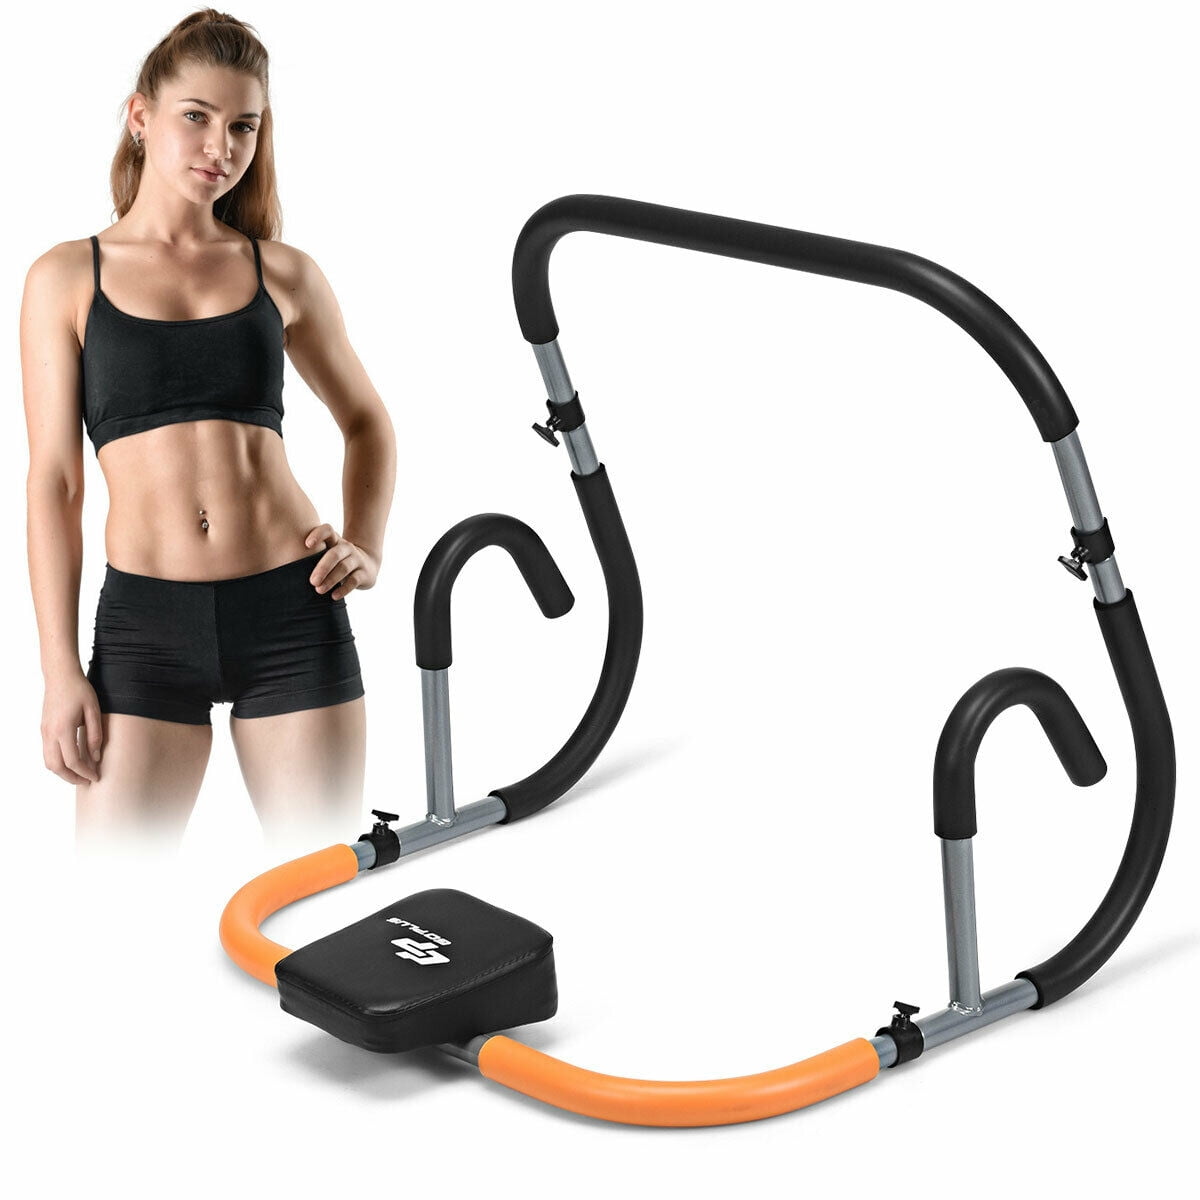 Details about   AB Trainer Abdominal Machine Exercise Crunch Roller Workout Exerciser EEAB-1BLK 